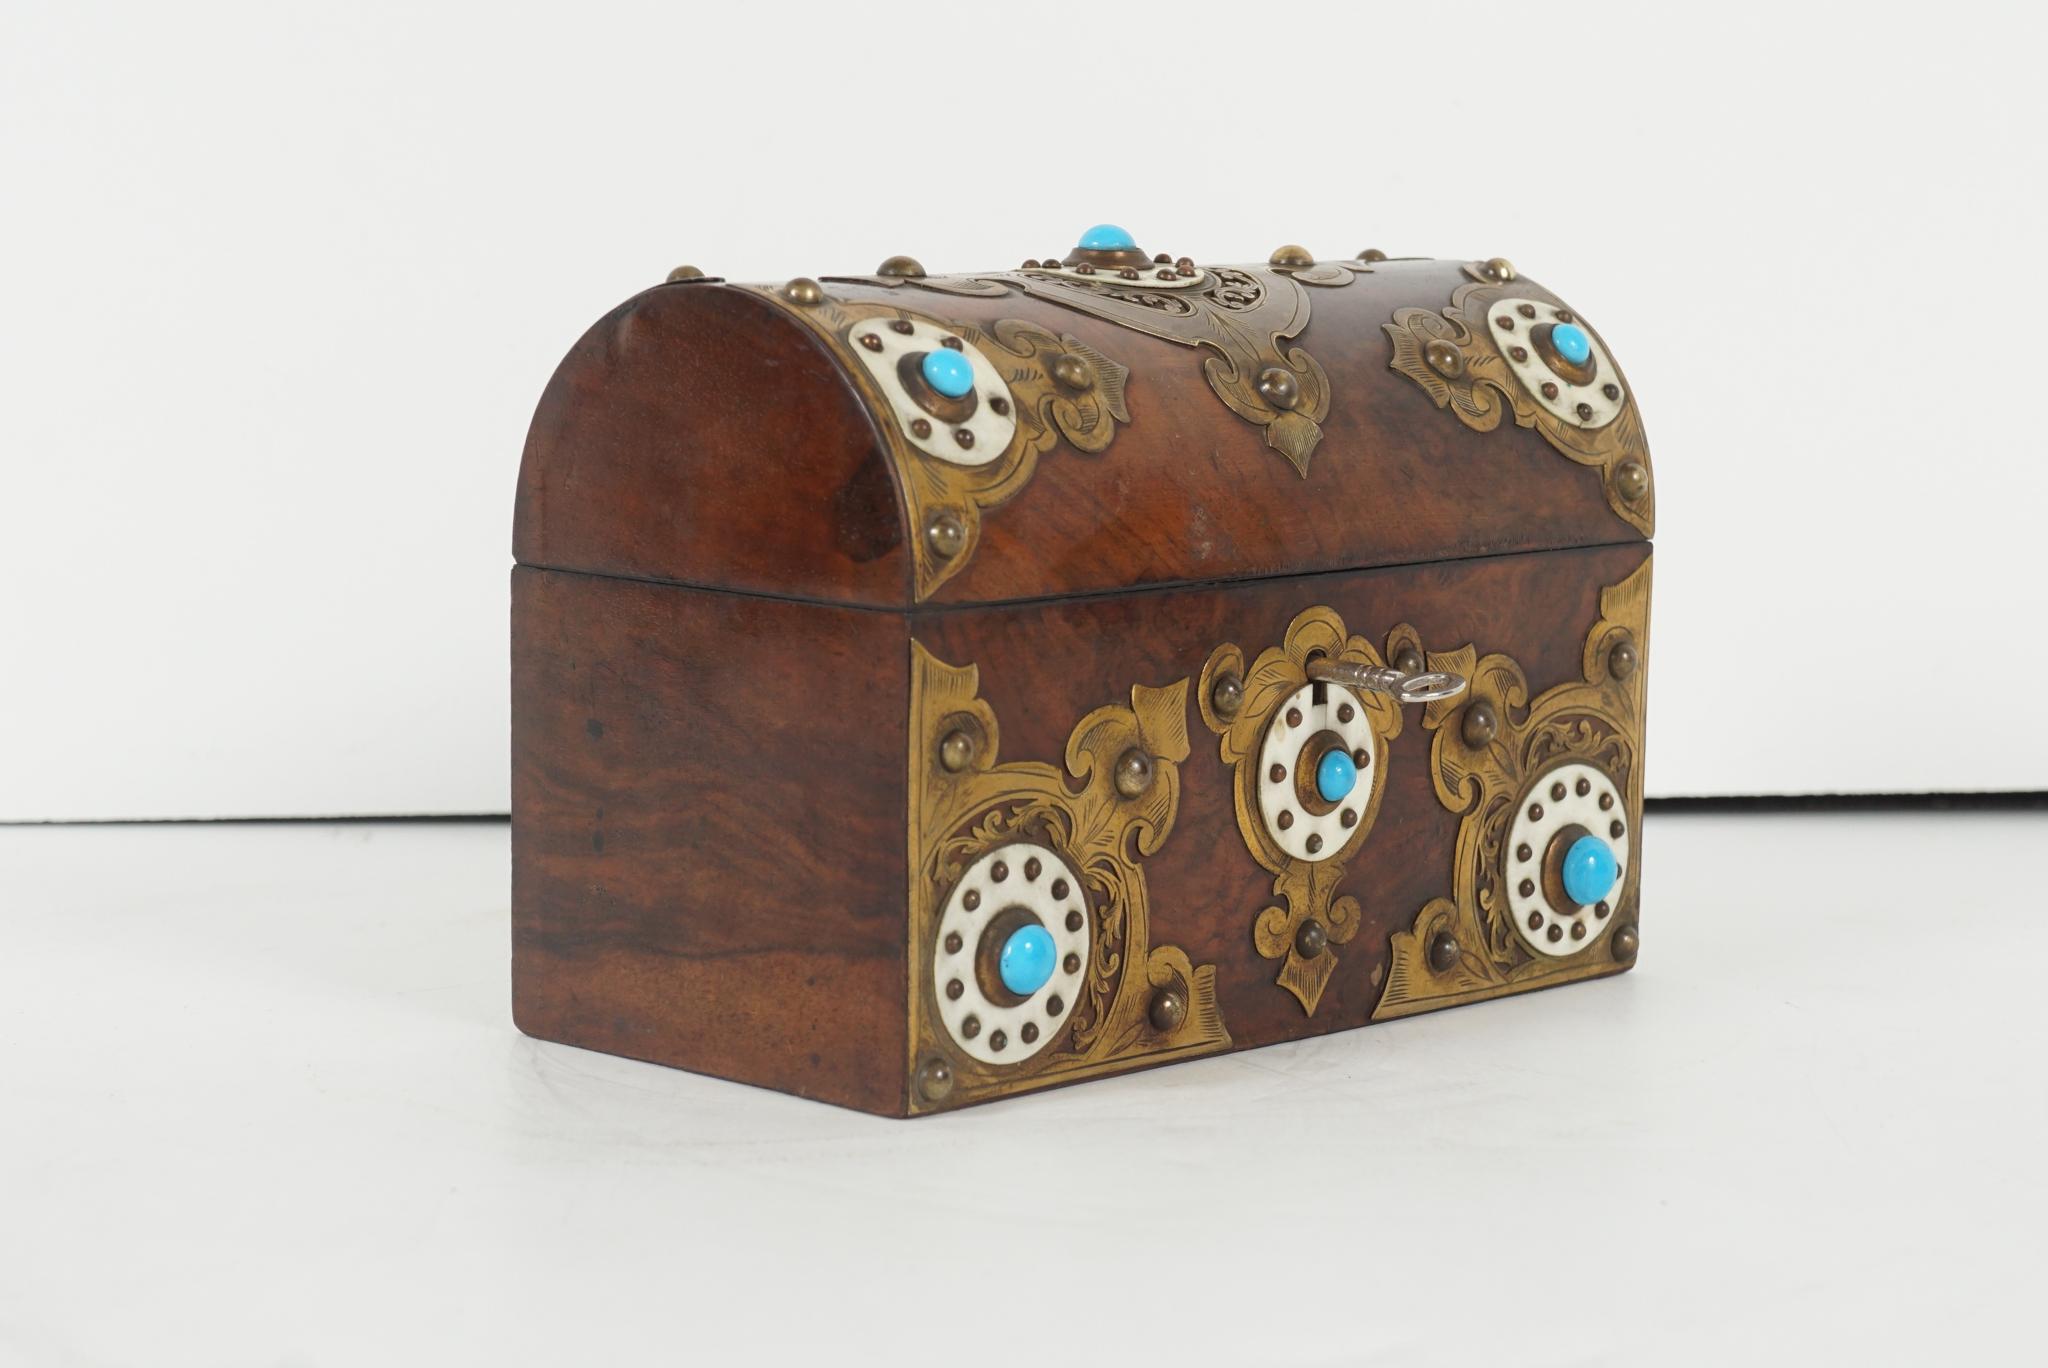 This fine old English box made circa 1850-1860 is made from burled walnut with dramatic figuring. The box is then mounted with gilded bronze and engraved mounts set with bone discs and further enhanced with turquoise glass jewels. The box retains